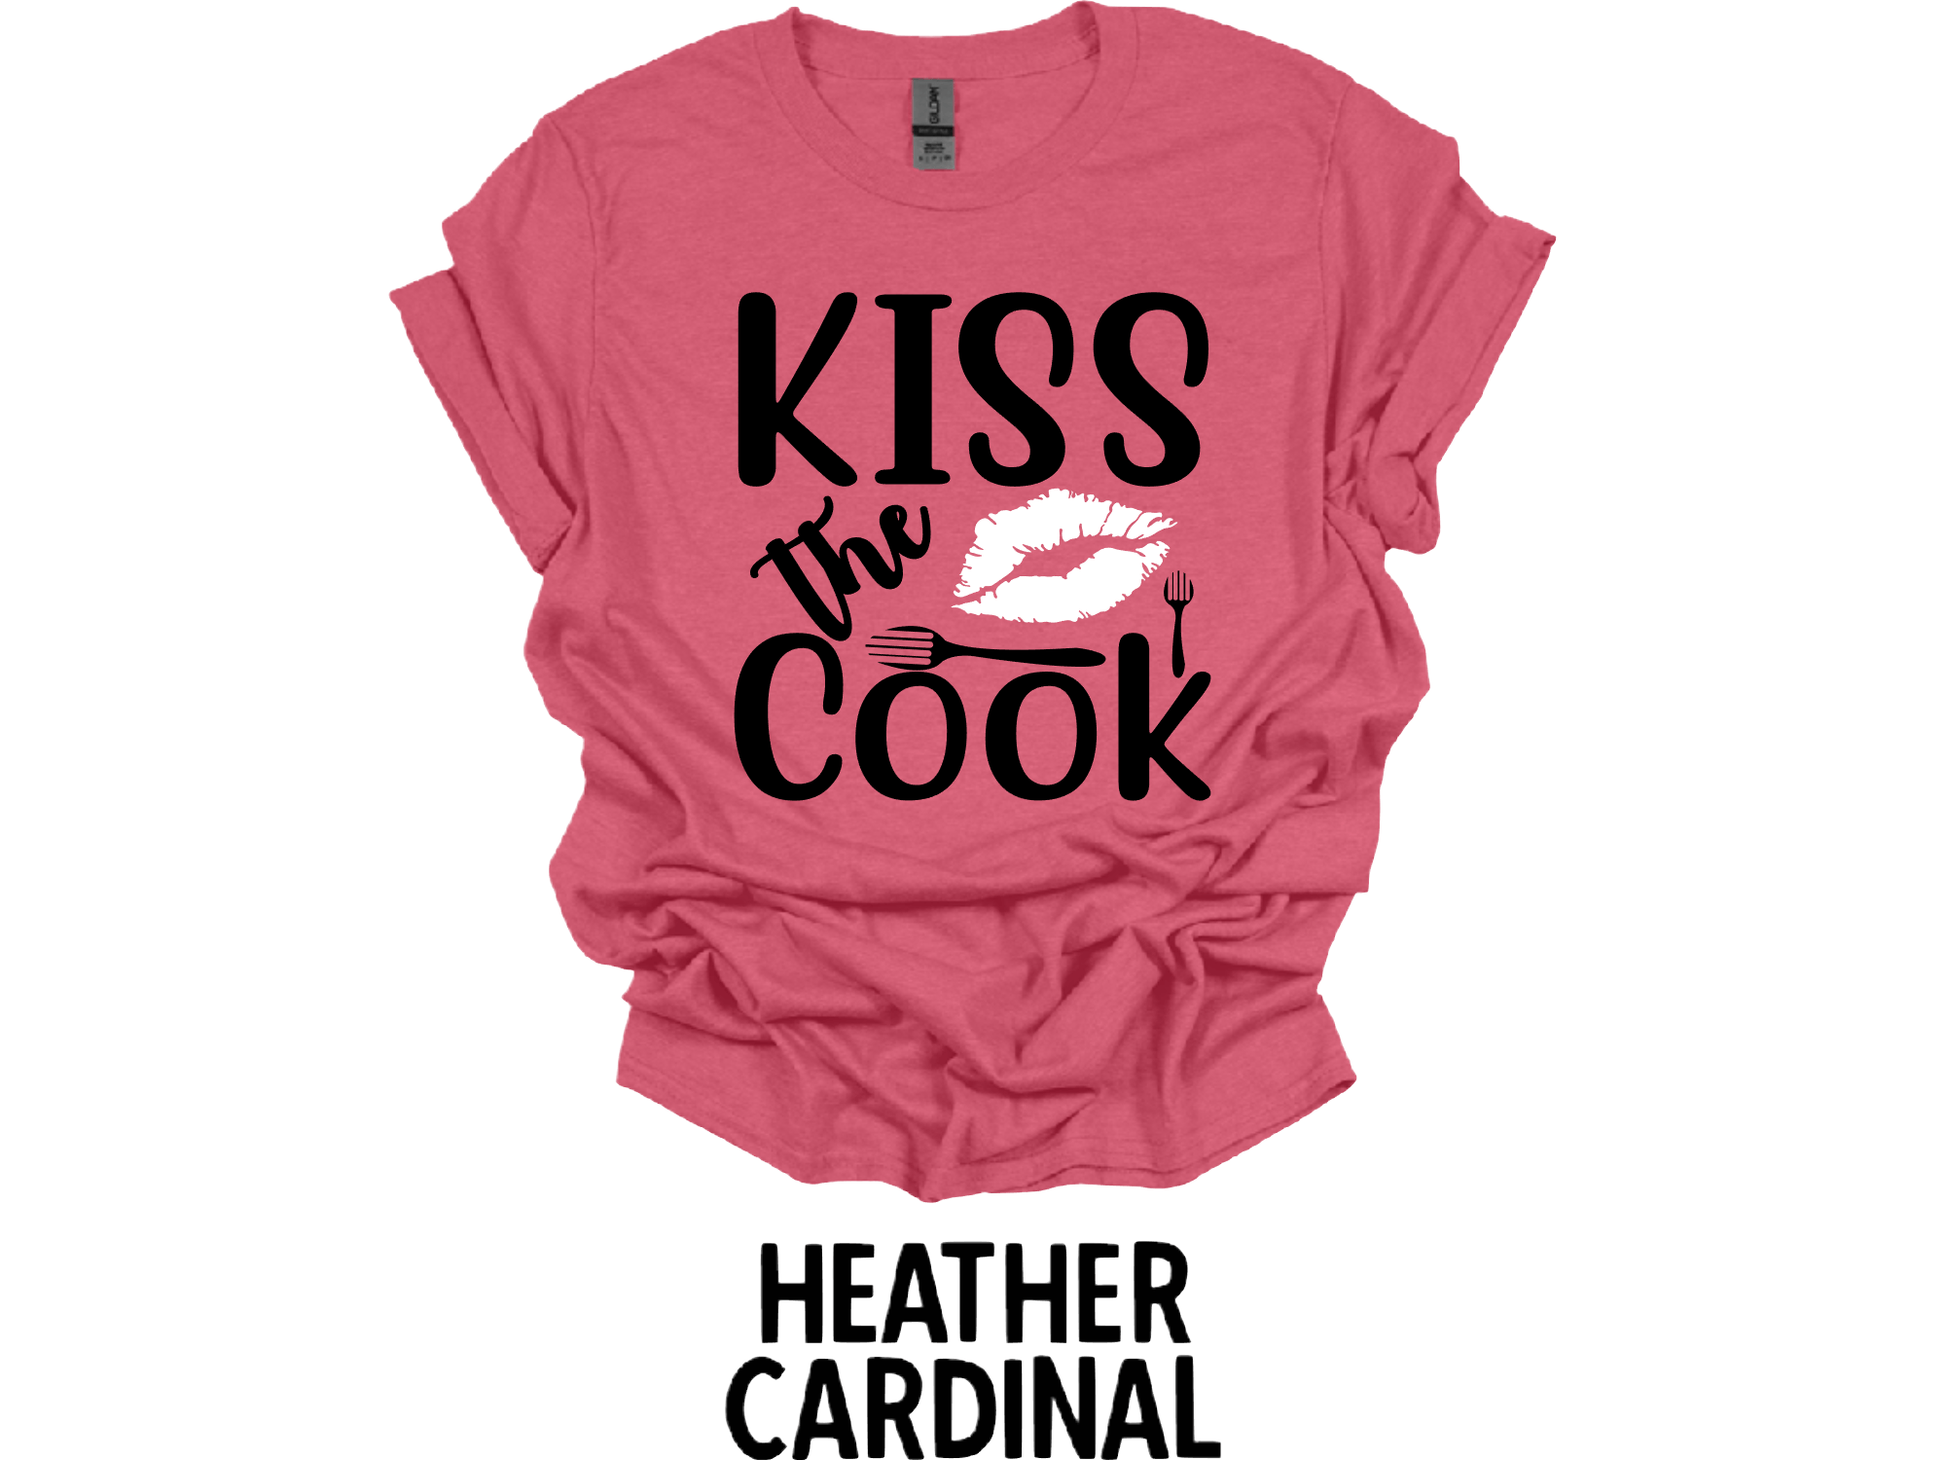 Kiss the cook t-shirt or hoodie (New Arrival) - smuniqueshirts